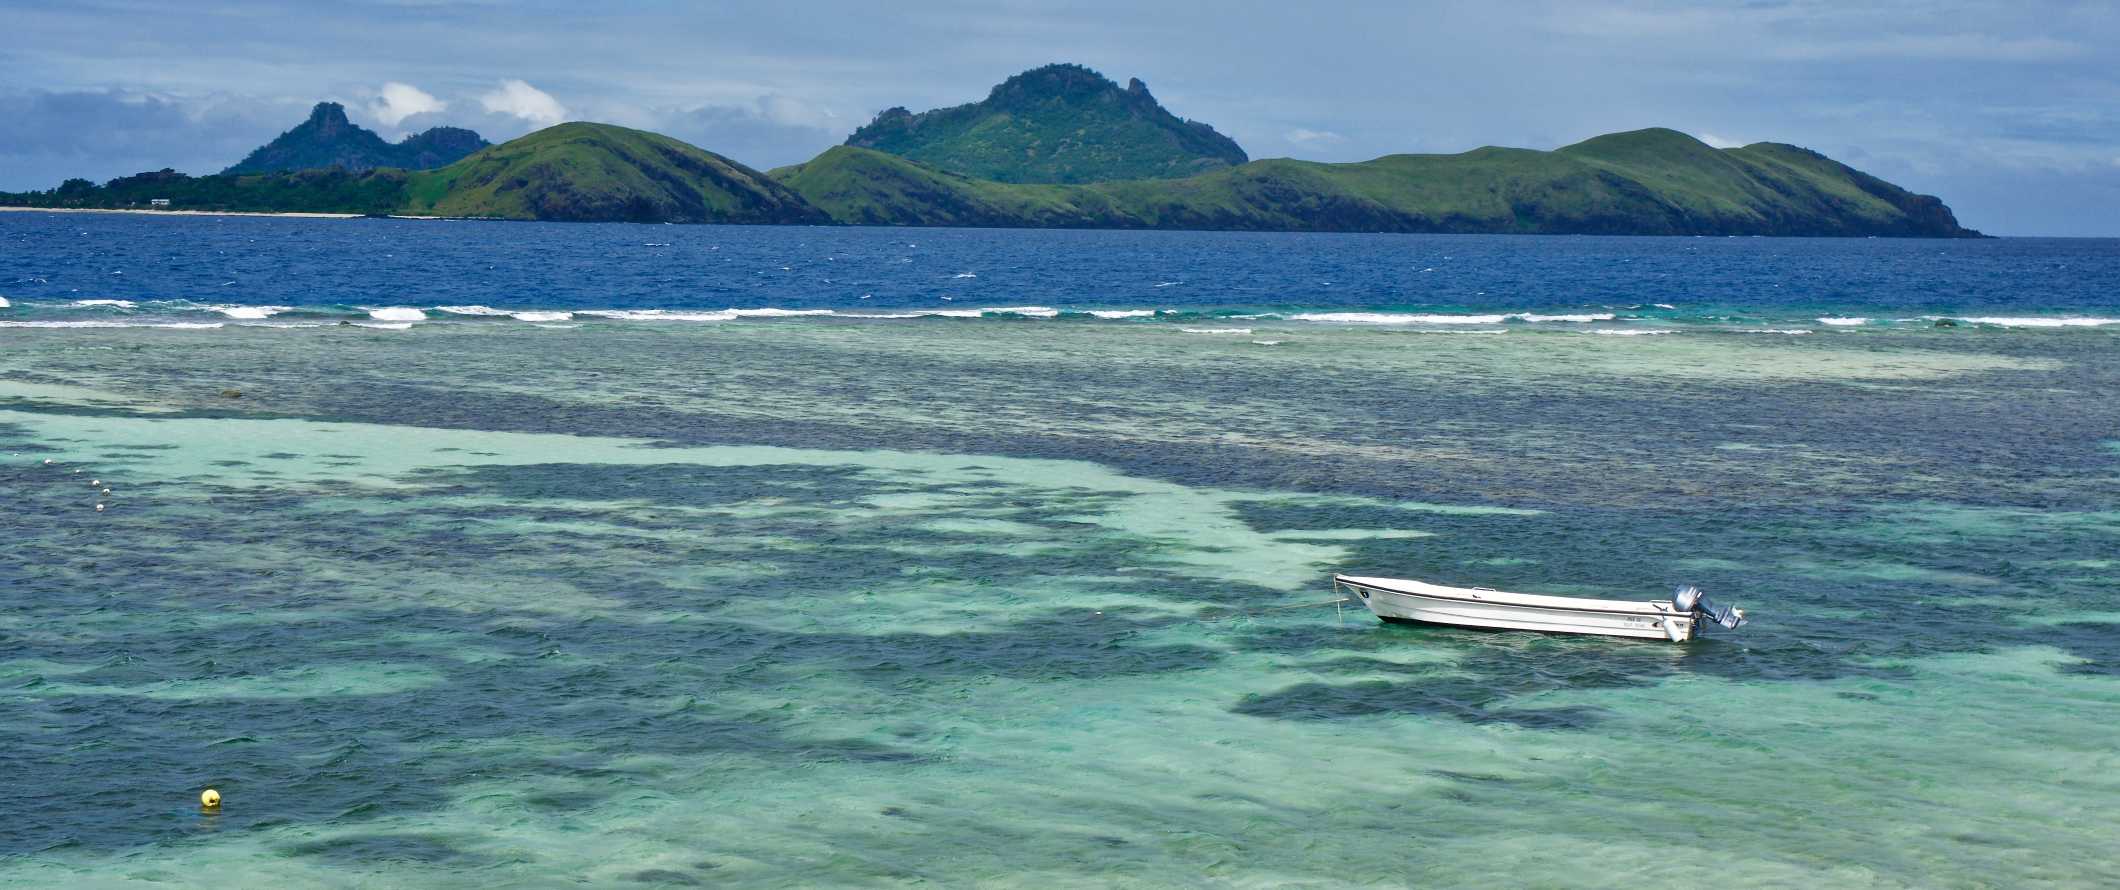 A small boat anchored in the tropical waters off the coast of an island in Fiji